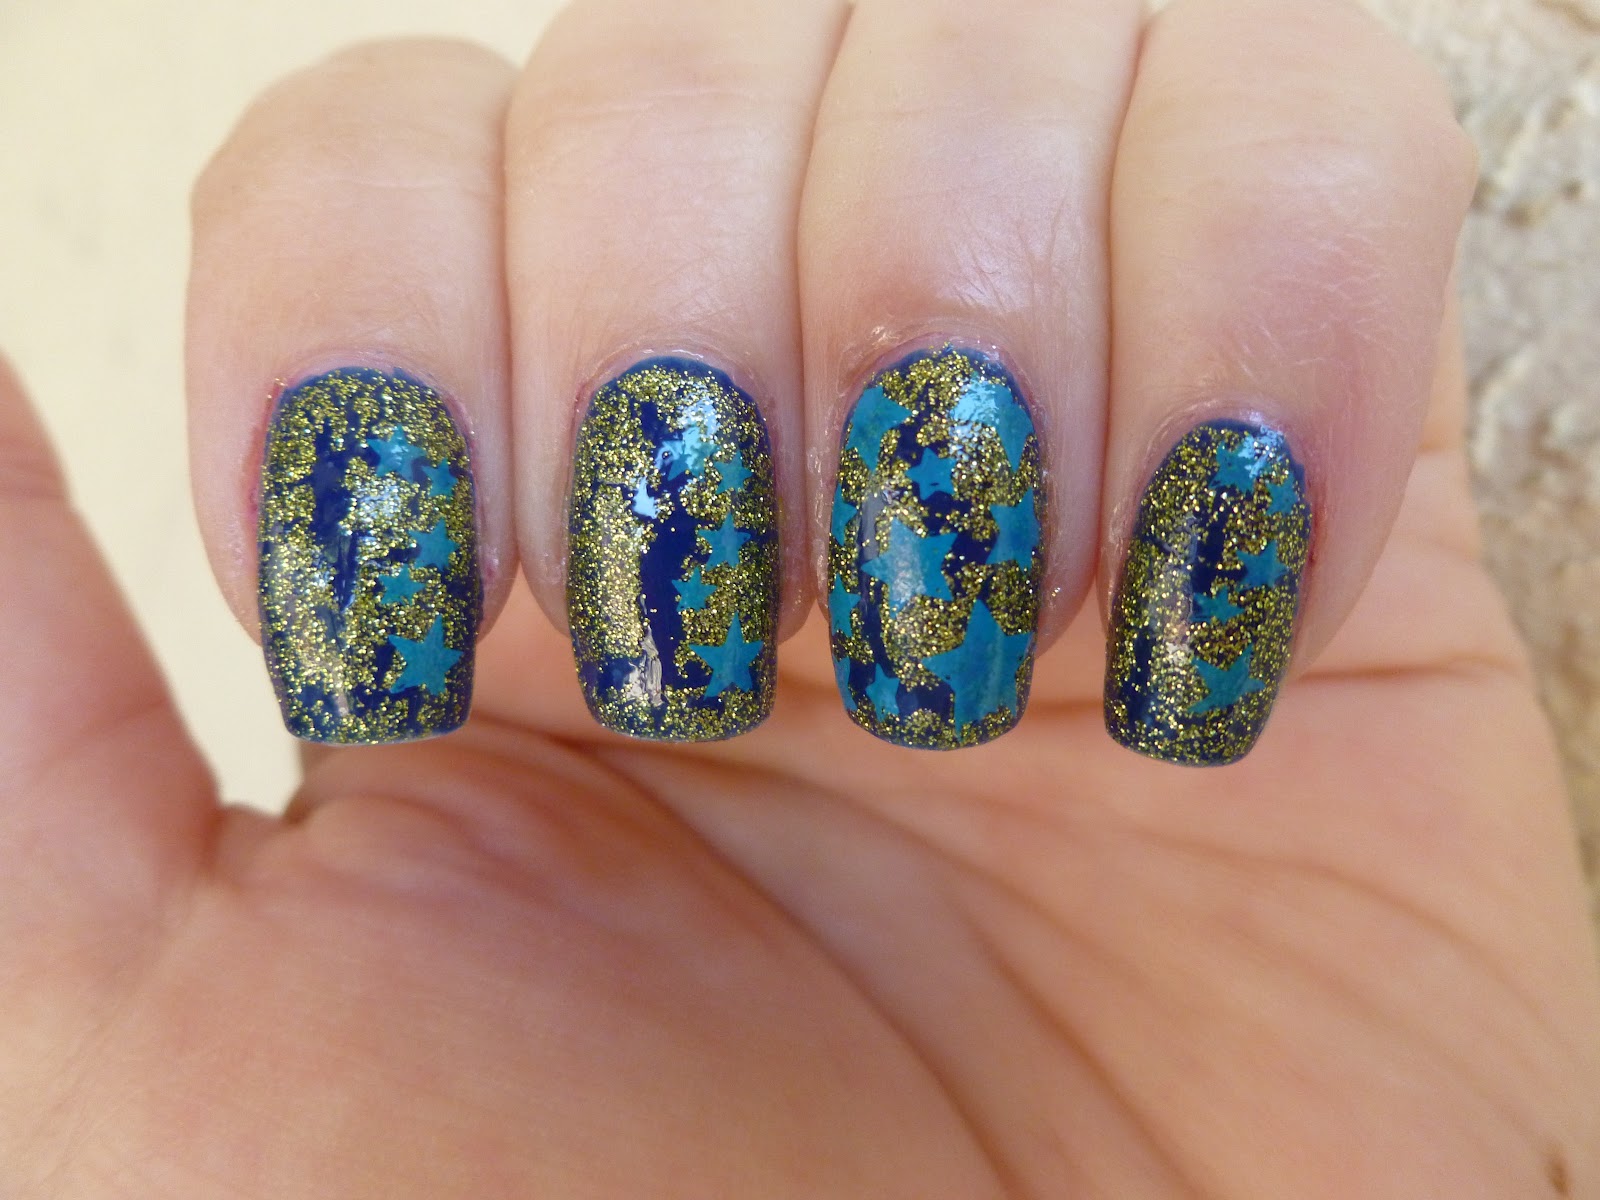 Lacquer or Leave Her!: NOTD: Stamped Glitter Mani!